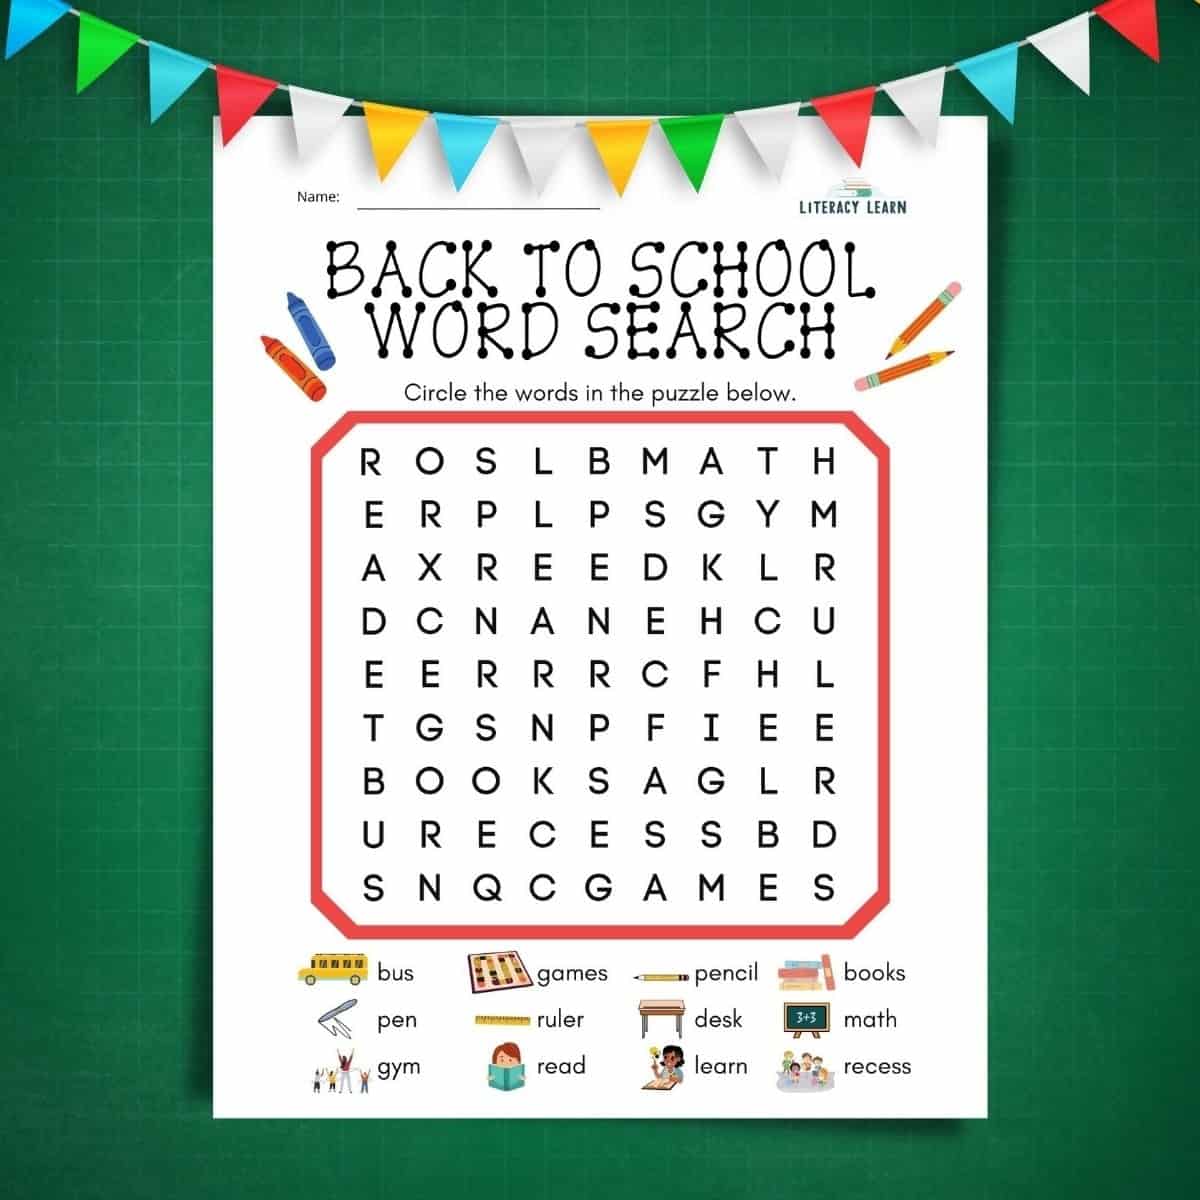 Green background with back to school word search featured. Multi-colored flags at the top.